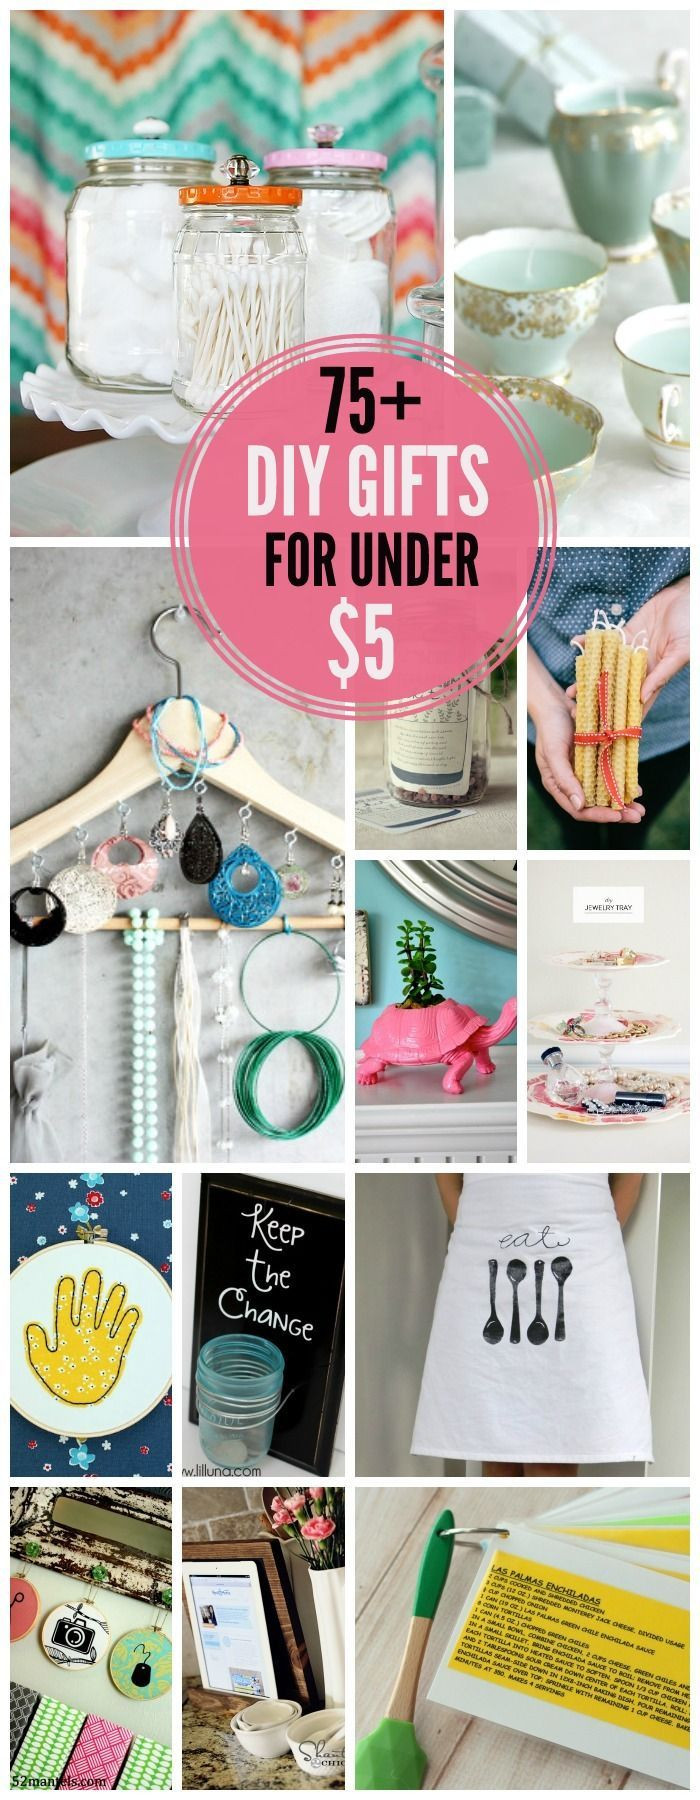 Christmas Gift Ideas Under $5
 75 Gift Ideas under $5 diy projects